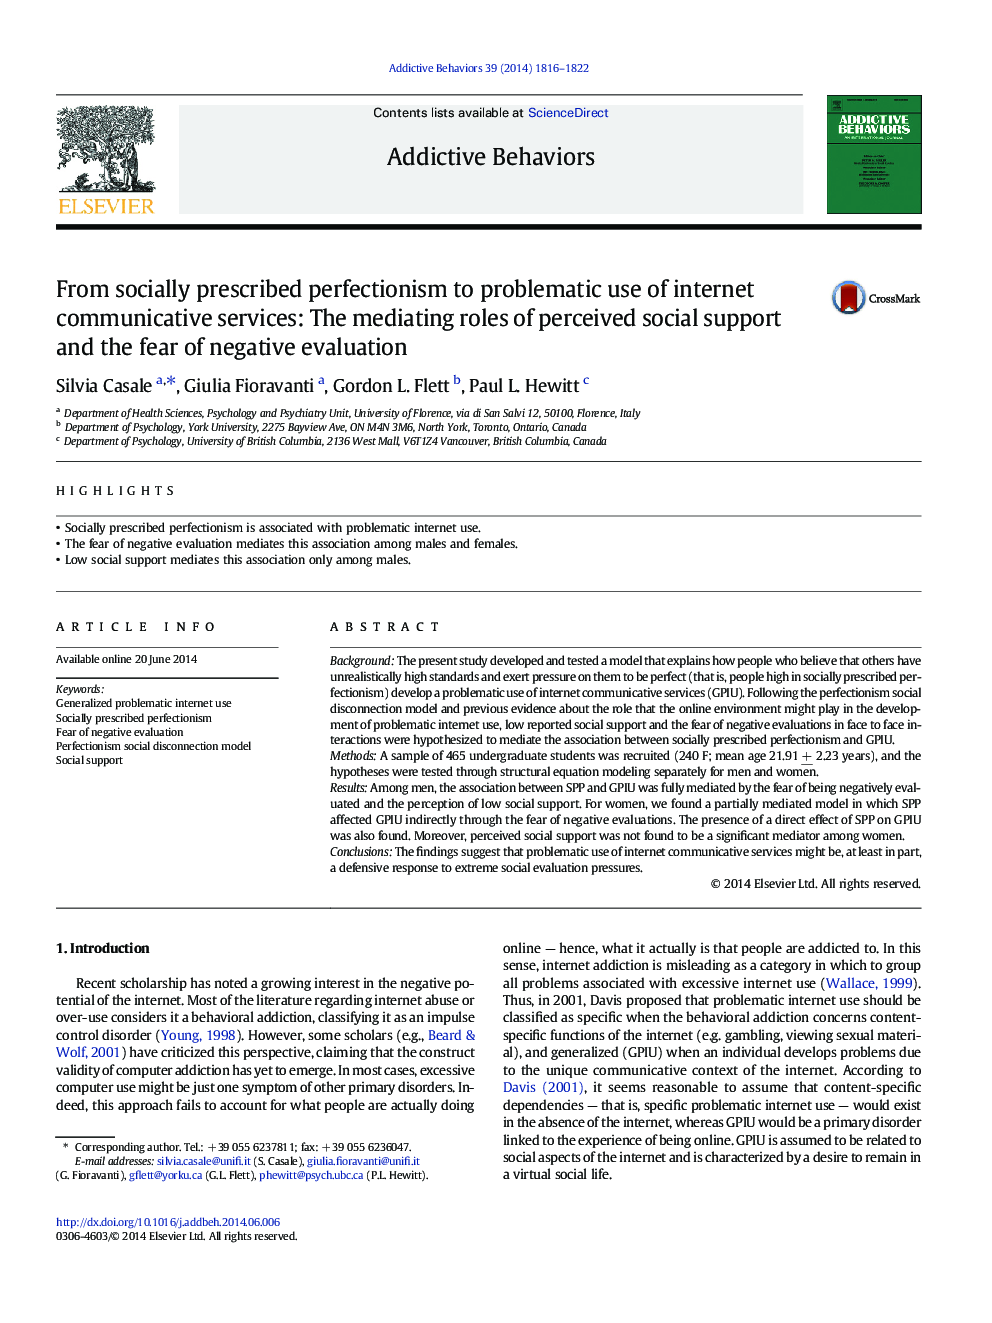 From socially prescribed perfectionism to problematic use of internet communicative services: The mediating roles of perceived social support and the fear of negative evaluation